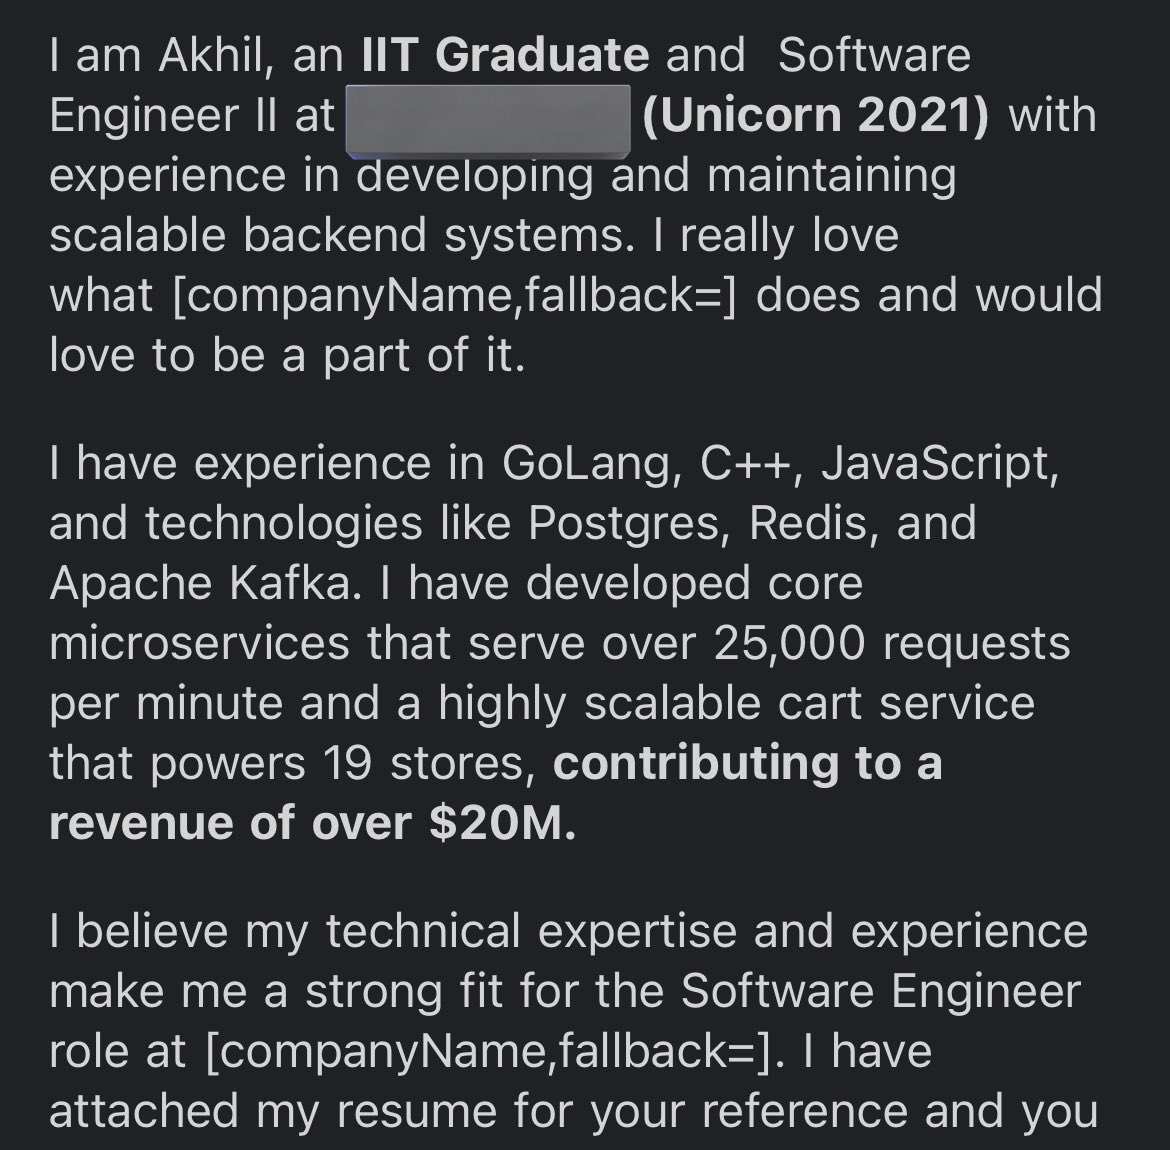 Ai-written raw cover letter from an IIT grad makes the rounds